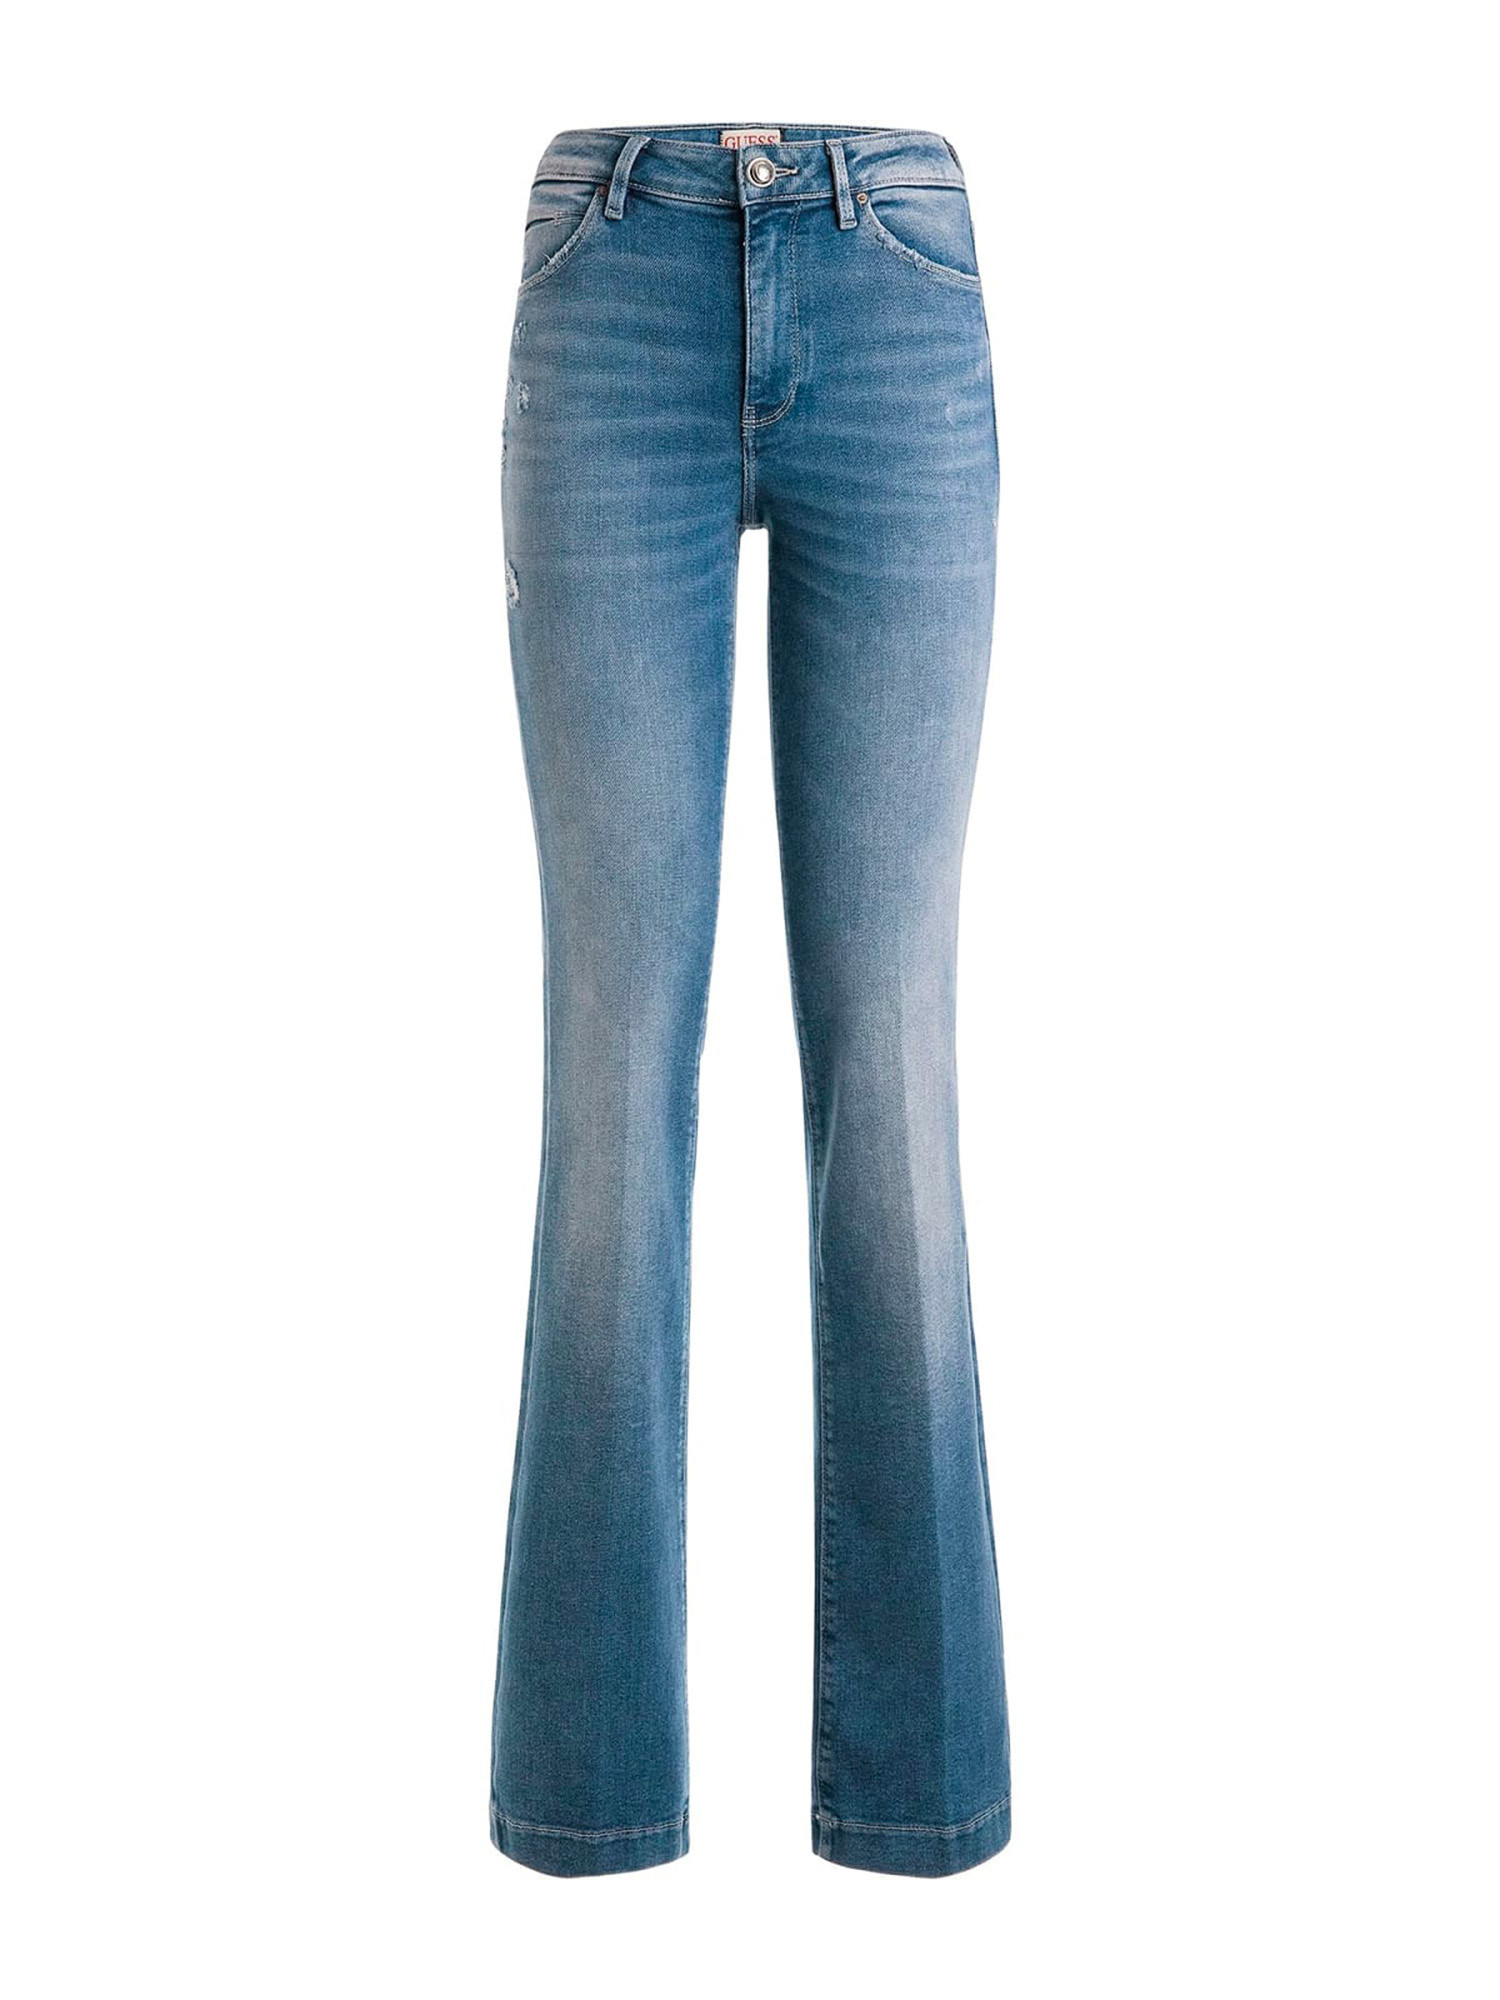 Guess - Jeans 5 tasche bootcut, Blu scuro, large image number 3